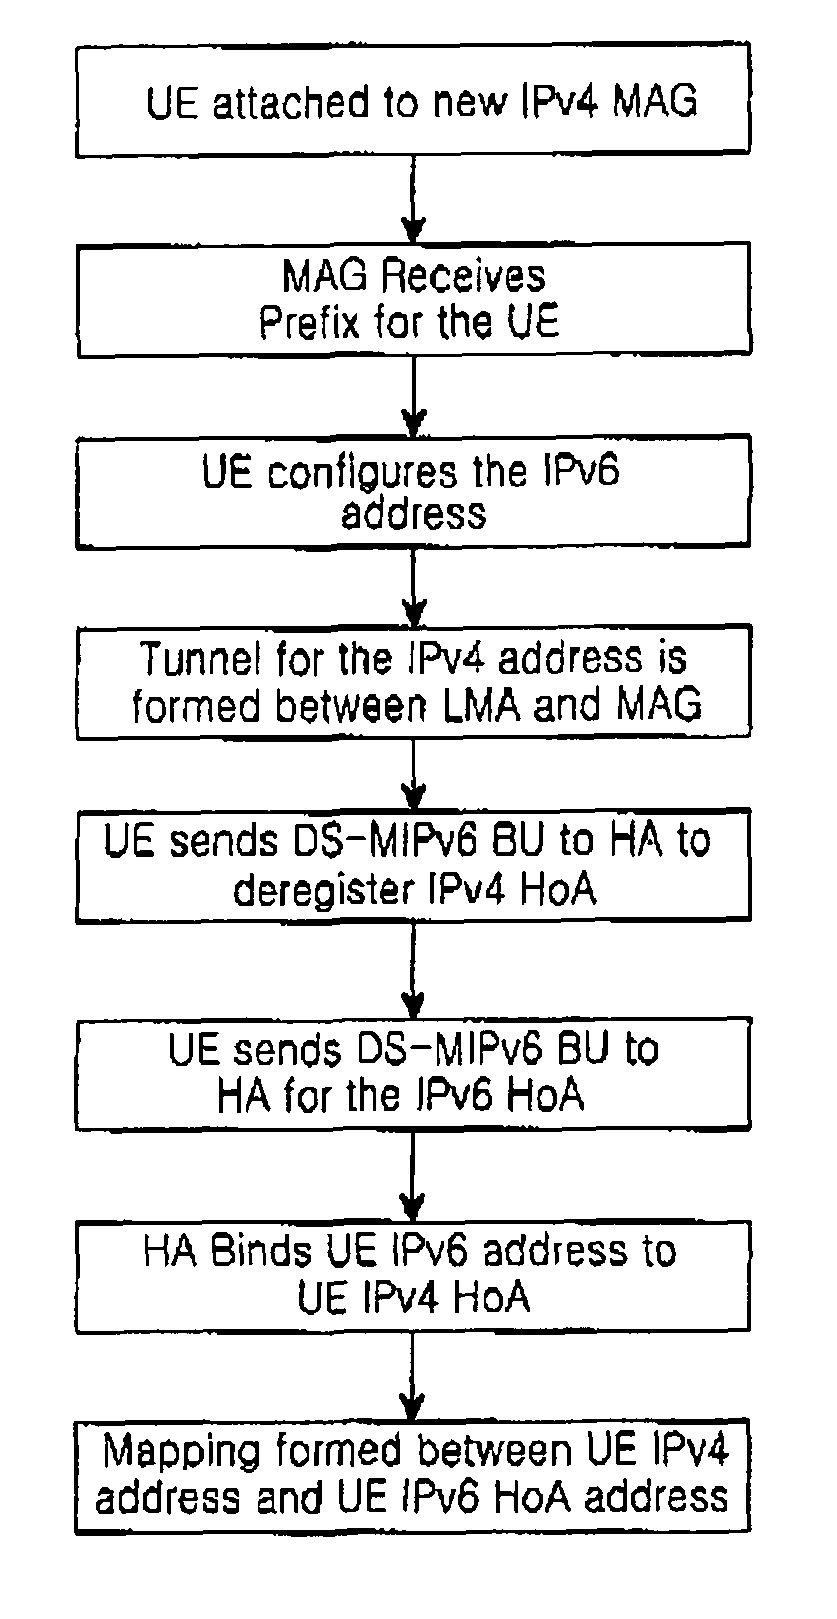 System and method to enable combination of network controlled mobility and UE controlled mobility between different IP versions